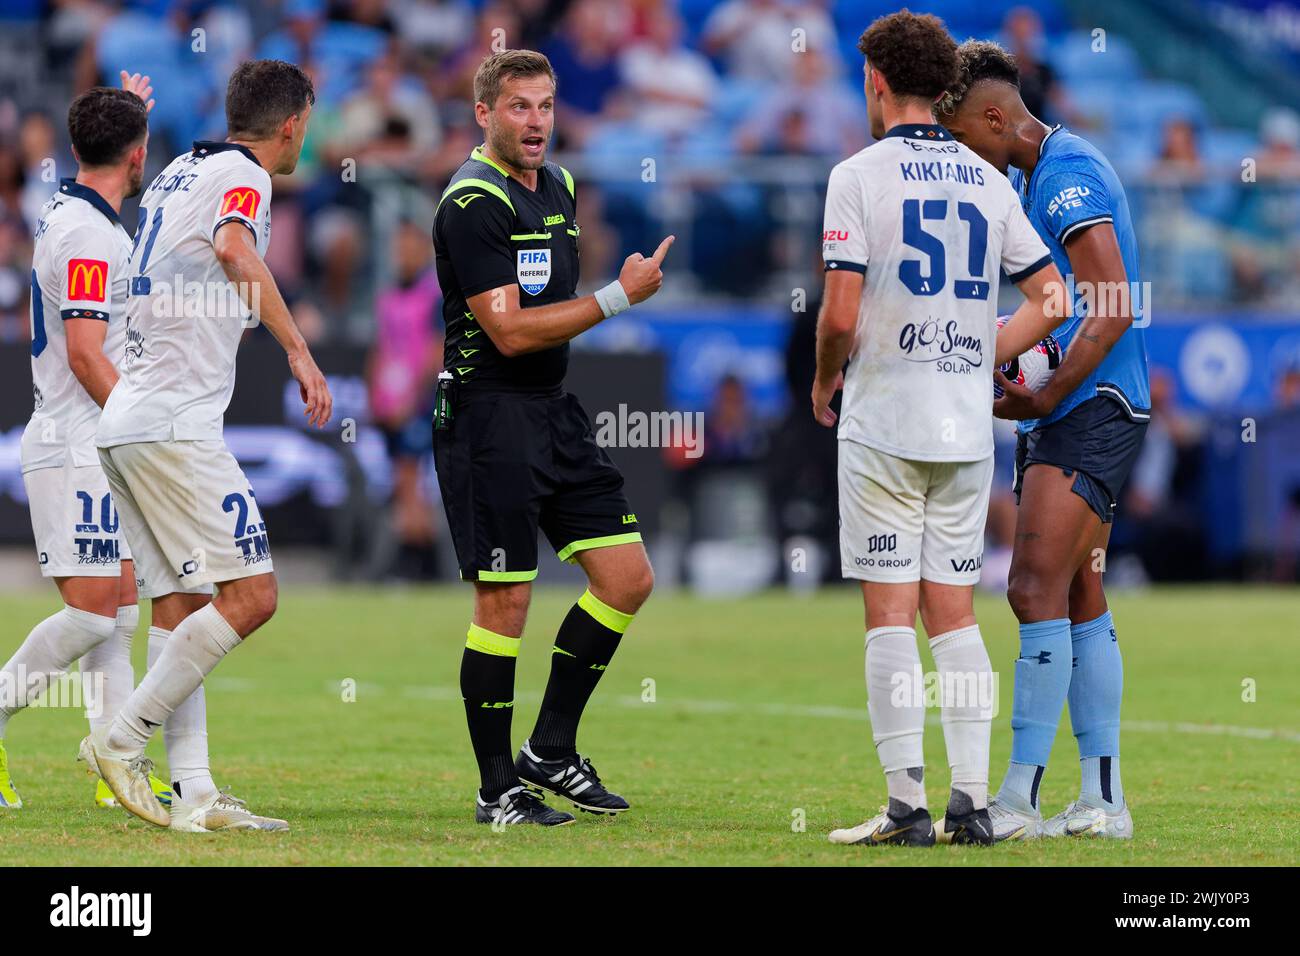 Sydney, Australia. 17th Feb, 2024. Match referee, Alex King speaks to Panagiotis Kikianis of Adelaide United during the A-League Men Rd17 match between Sydney FC and Adelaide United at Alliance Stadium on February 17, 2024 in Sydney, Australia Credit: IOIO IMAGES/Alamy Live News Stock Photo